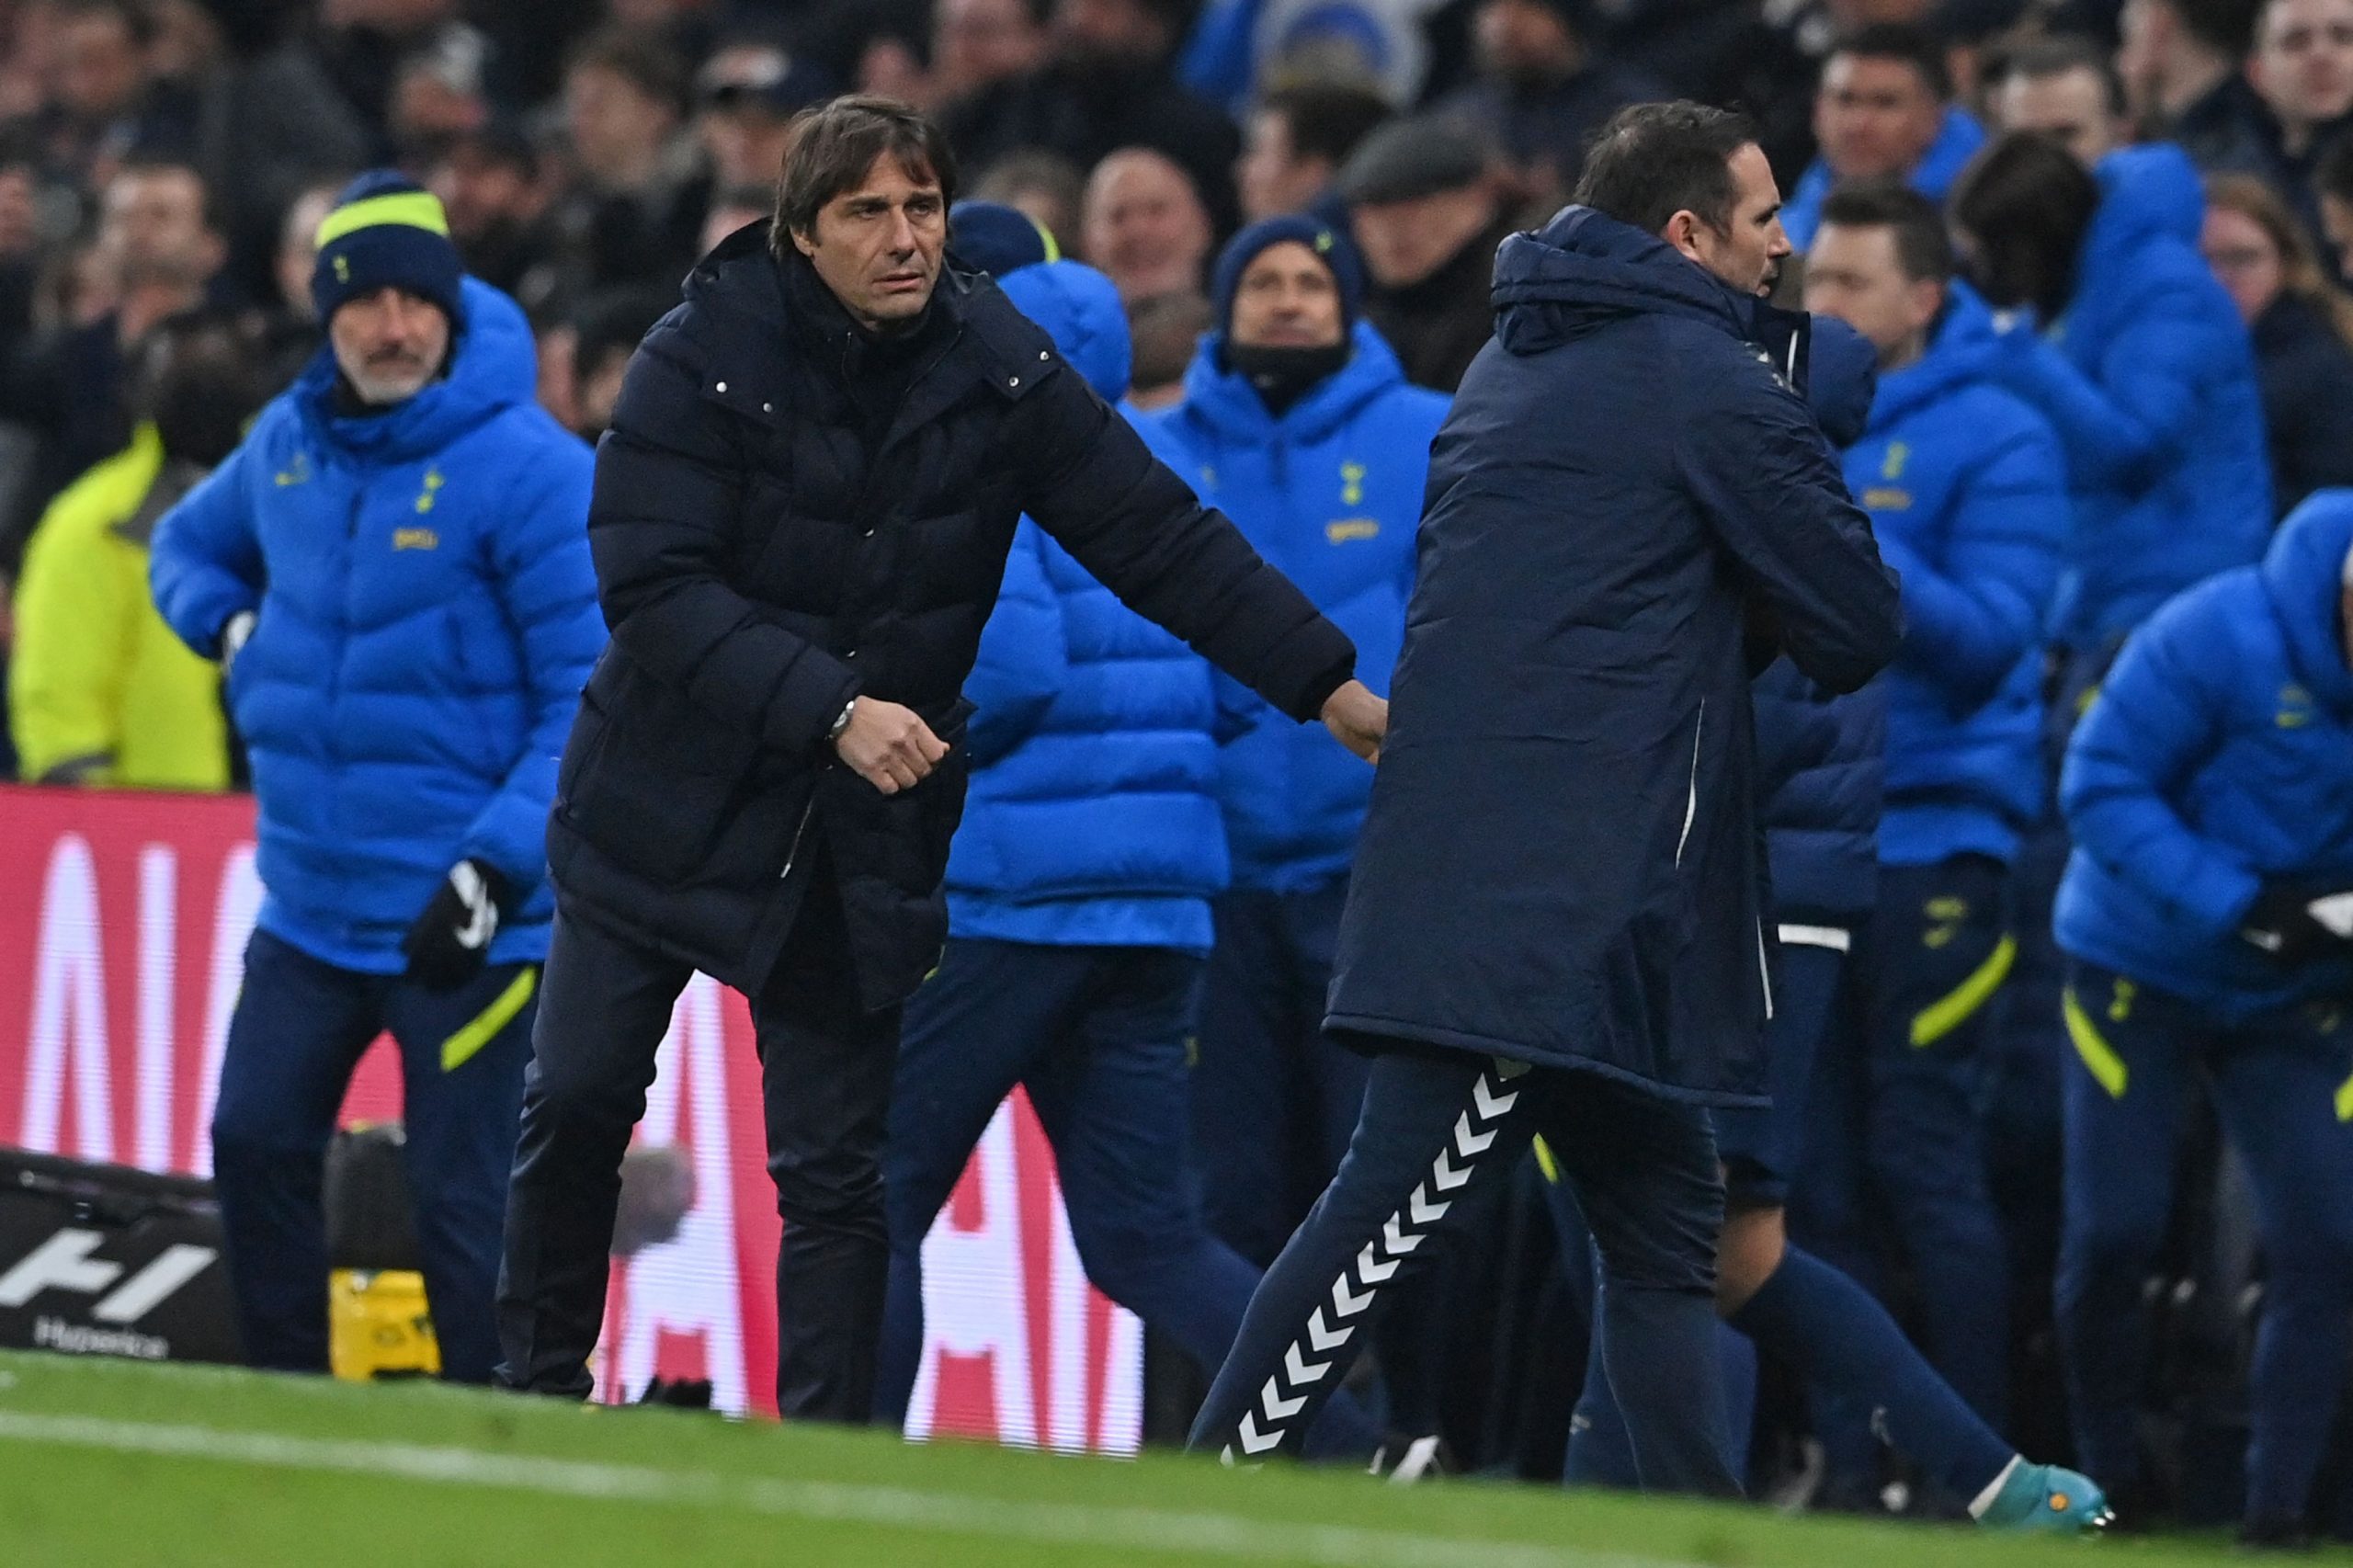 Tottenham Hotspur manager Antonio Conte says finishing in the top four would be like winning a trophy.